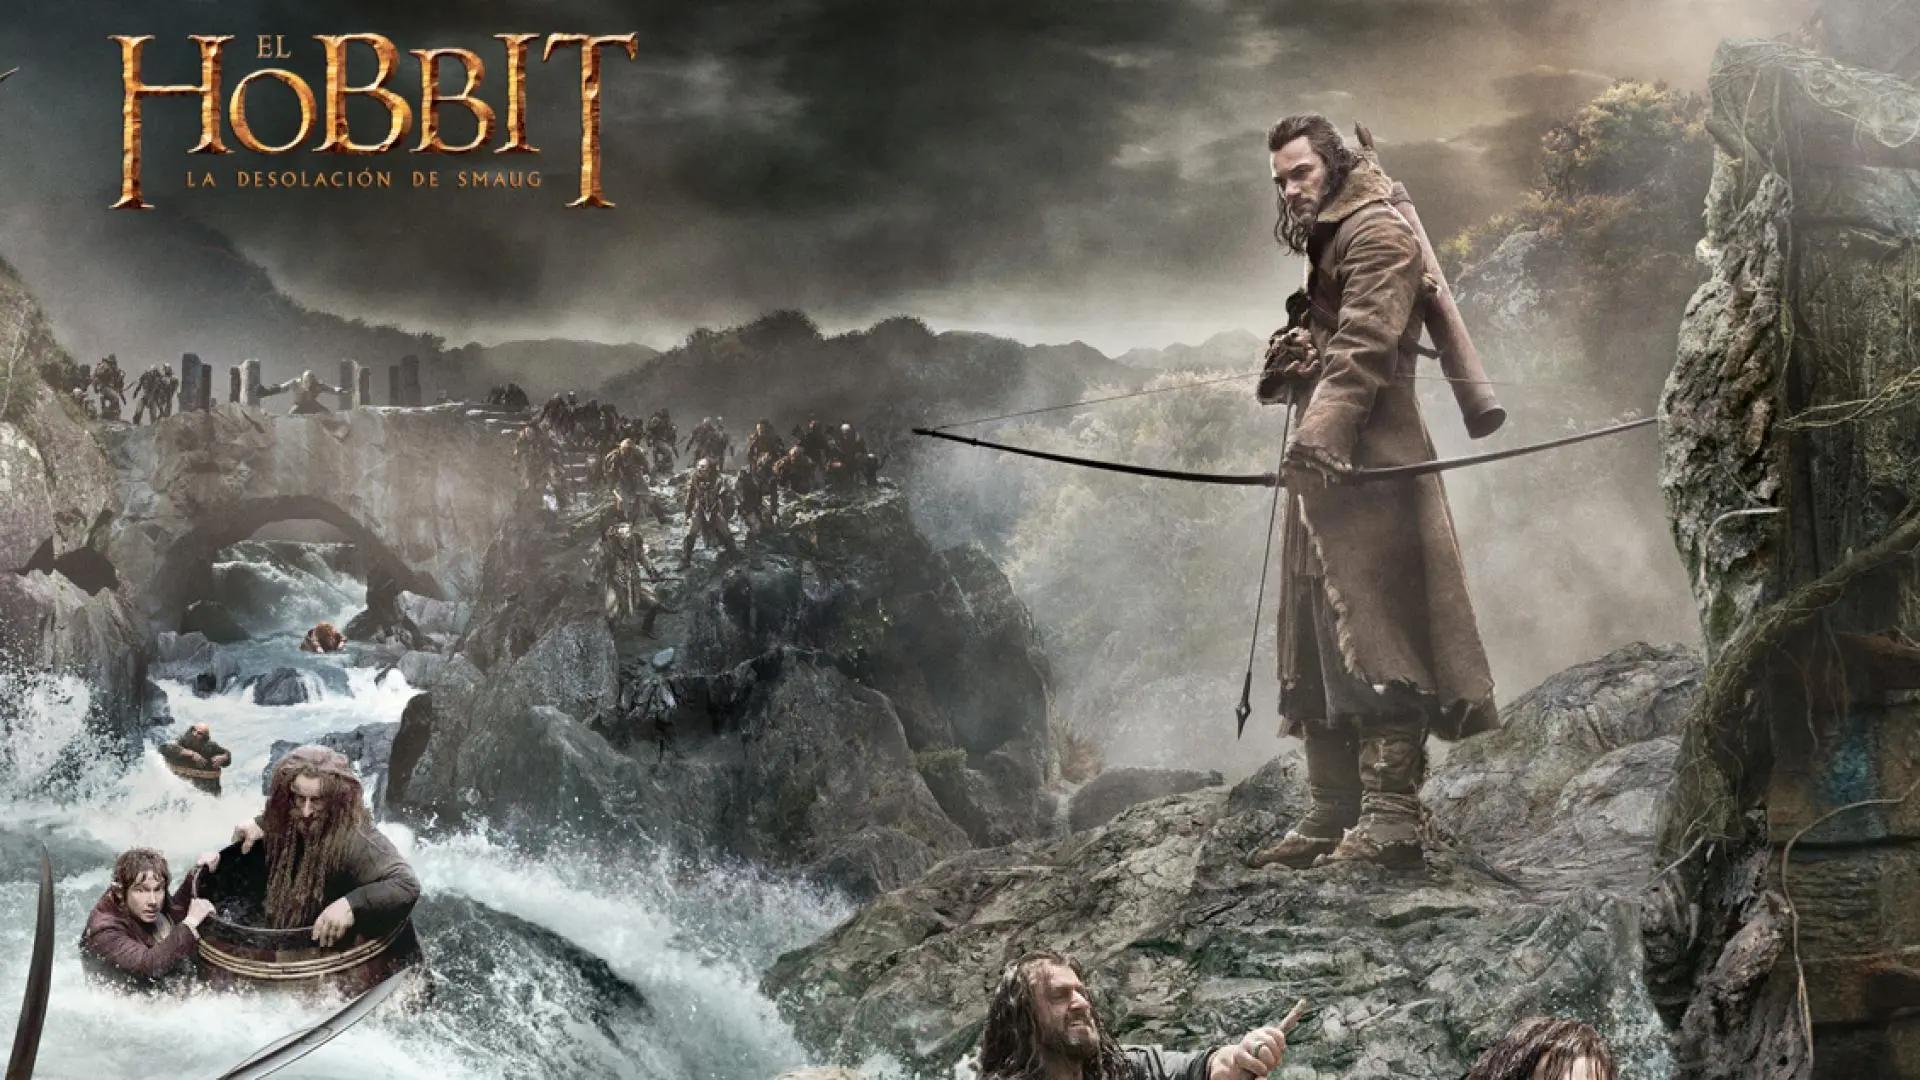 Movie The Hobbit the Desolation of Smaug wallpaper 12 | Background Image